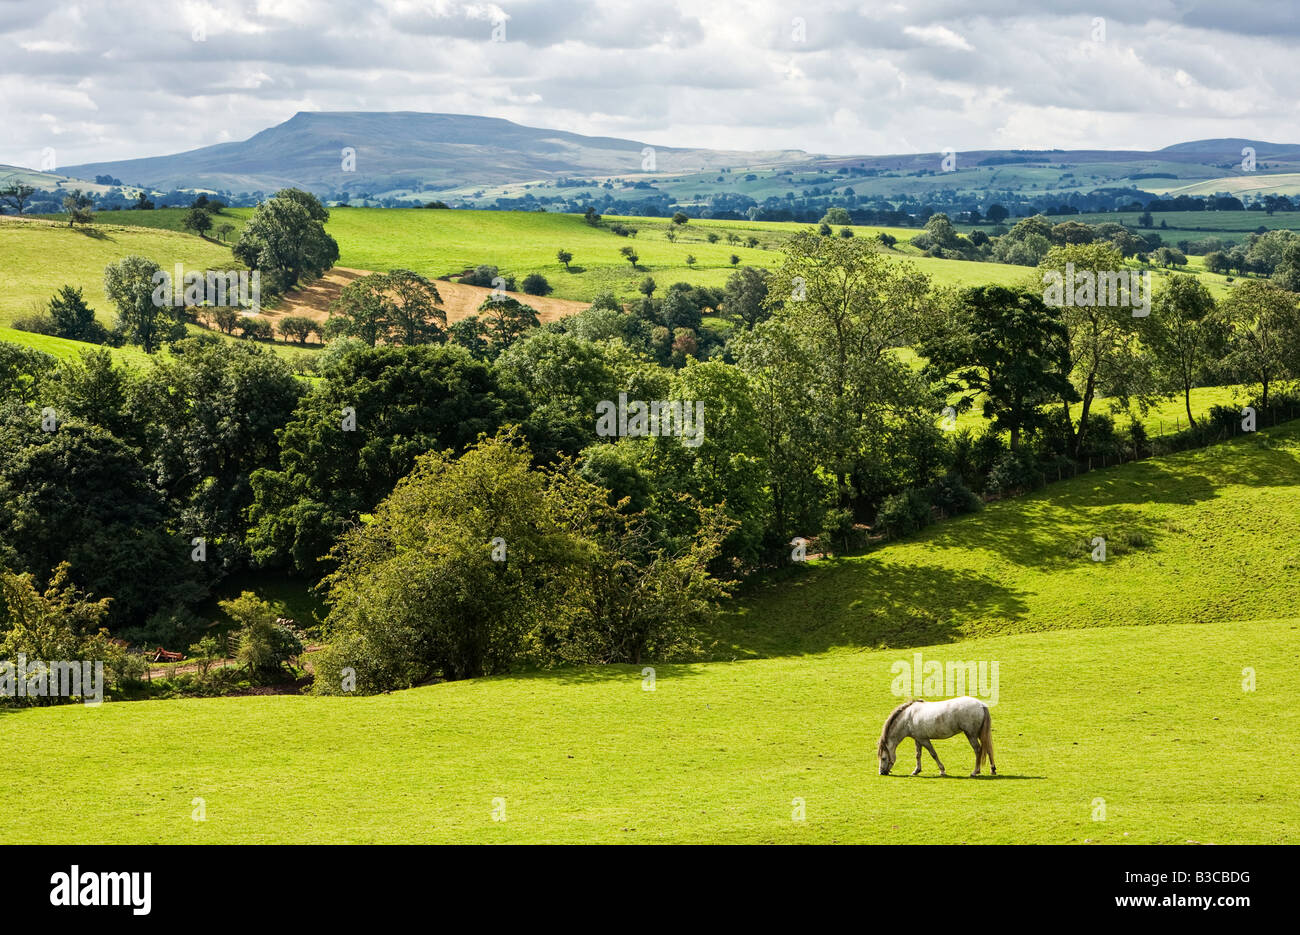 Teesdale countryside looking towards Pen y Ghent, North Yorkshire, England, UK Stock Photo